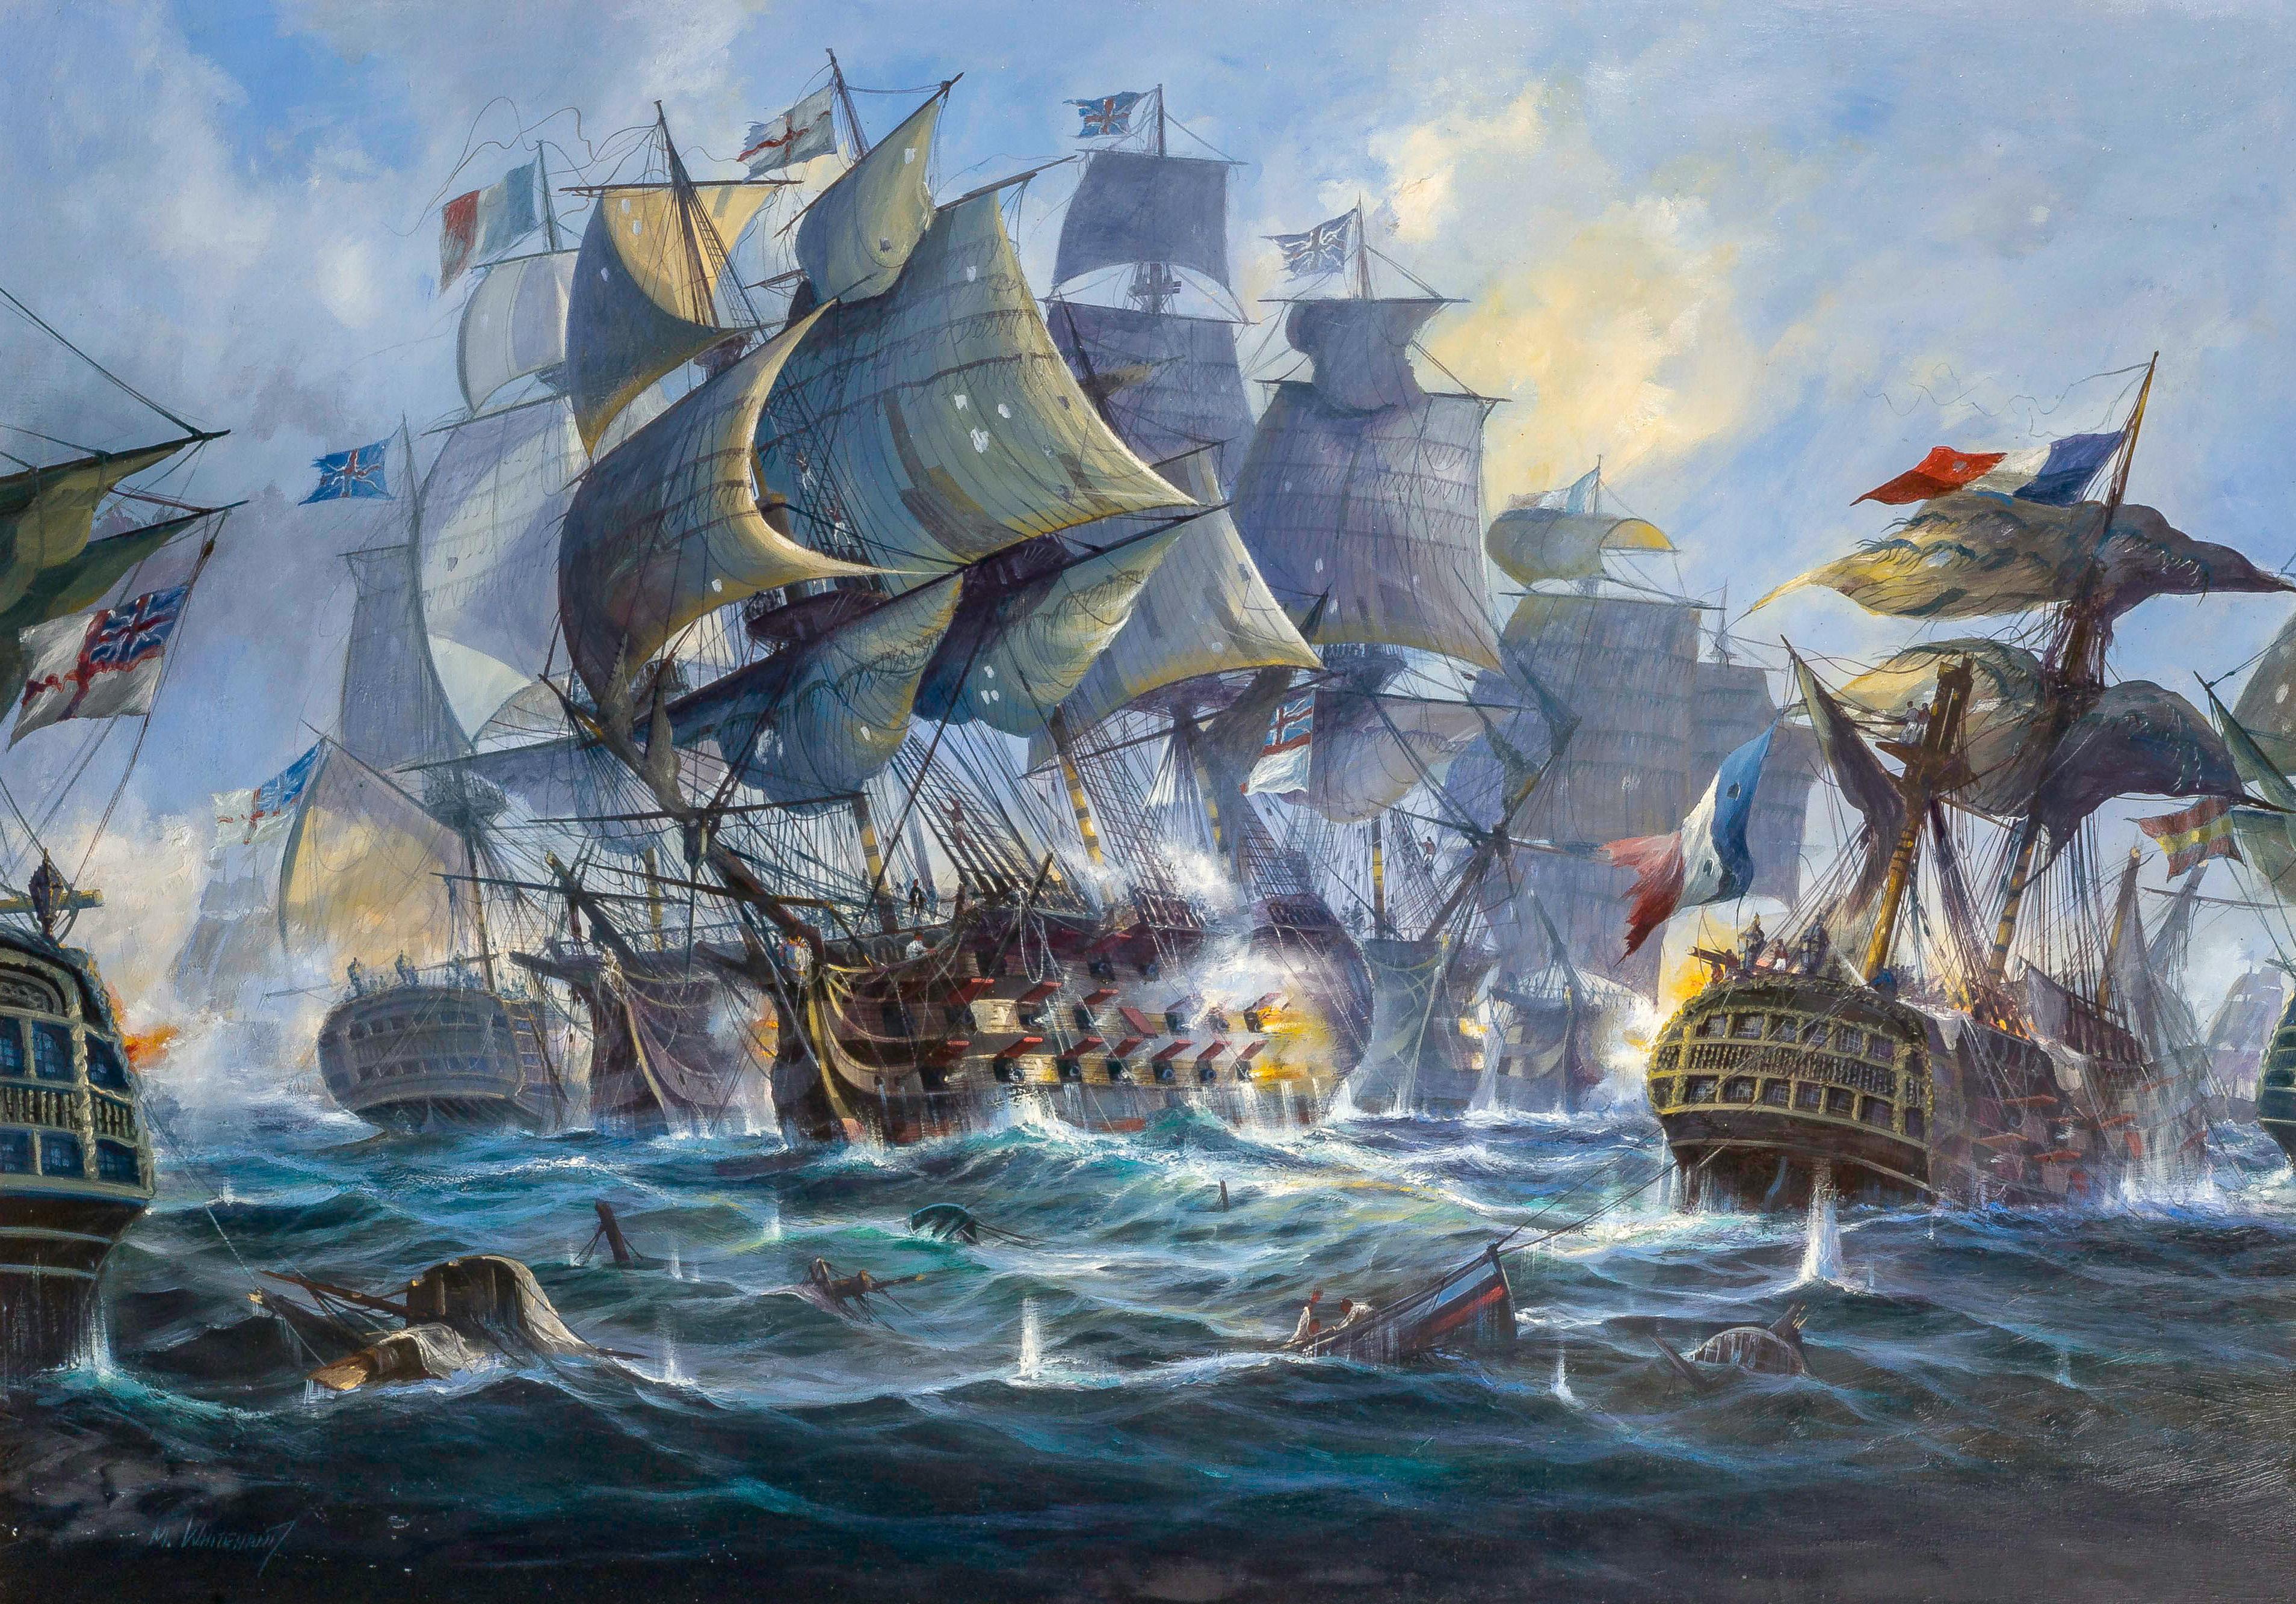 The Battle of Trafalgar - Painting by Michael Whitehand